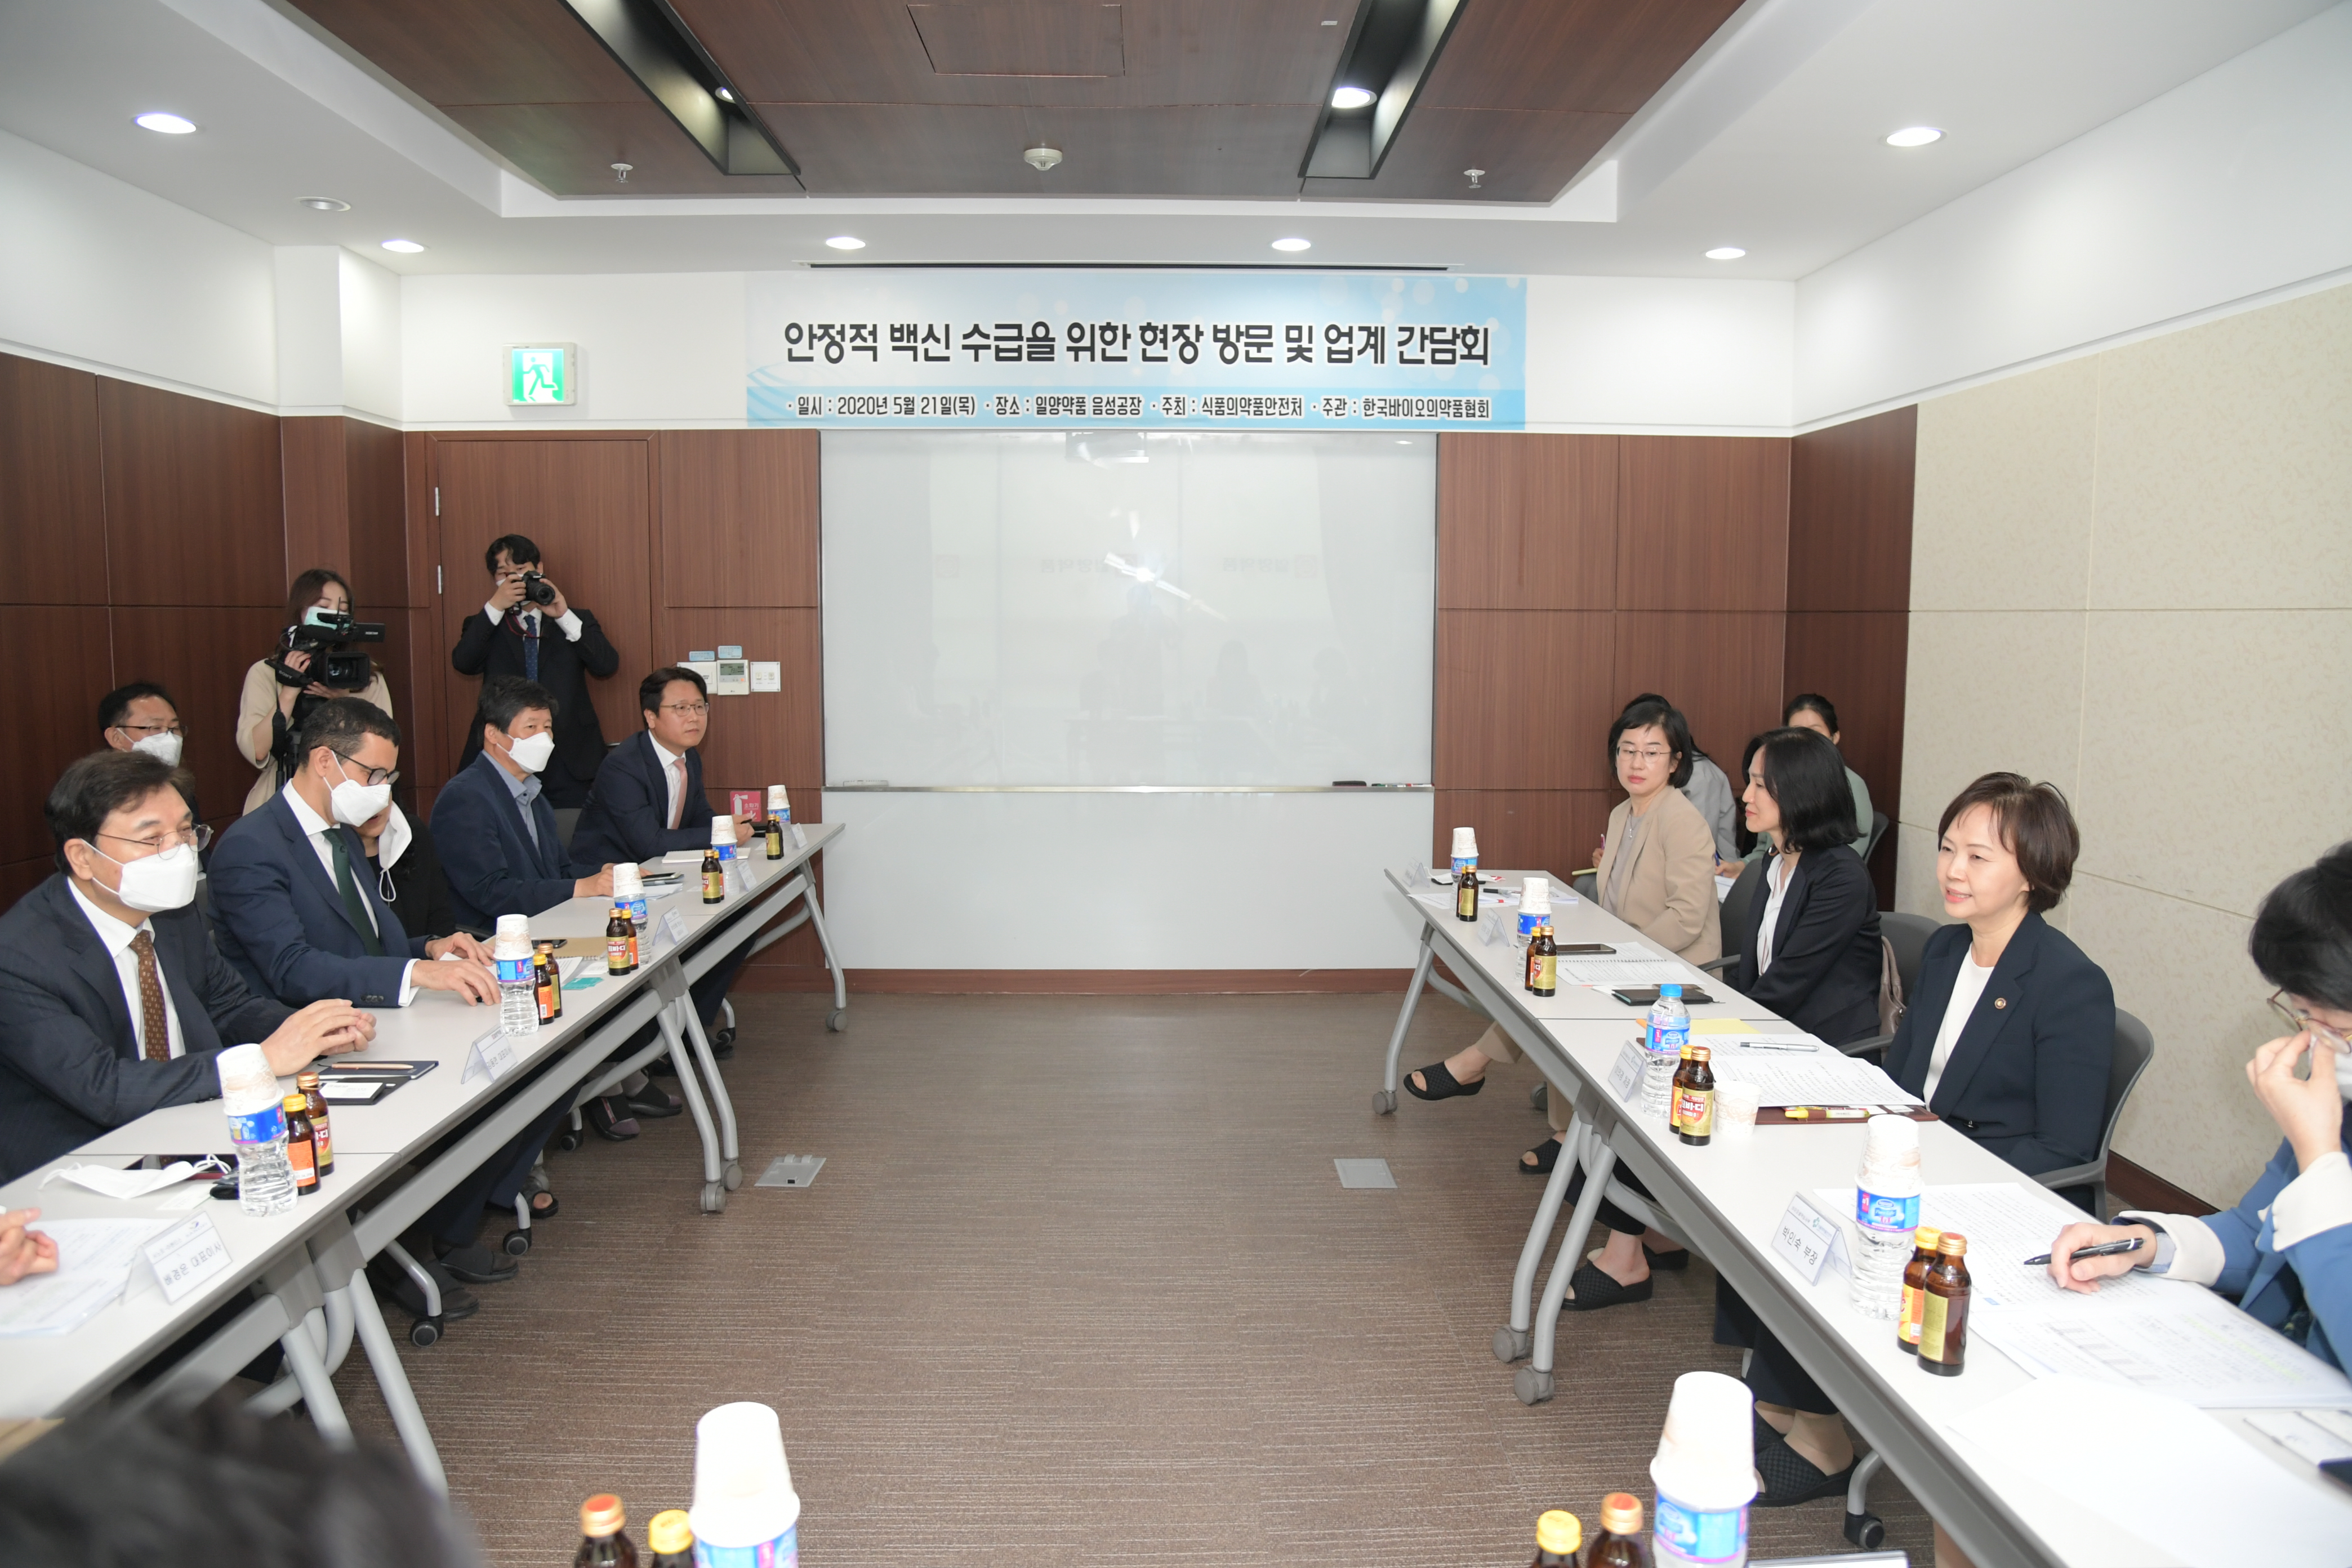 Photo News2 - [May 22, 2020] Minister inspects influenza vaccine manufacturing sites and attends pharmaceutical industry conference